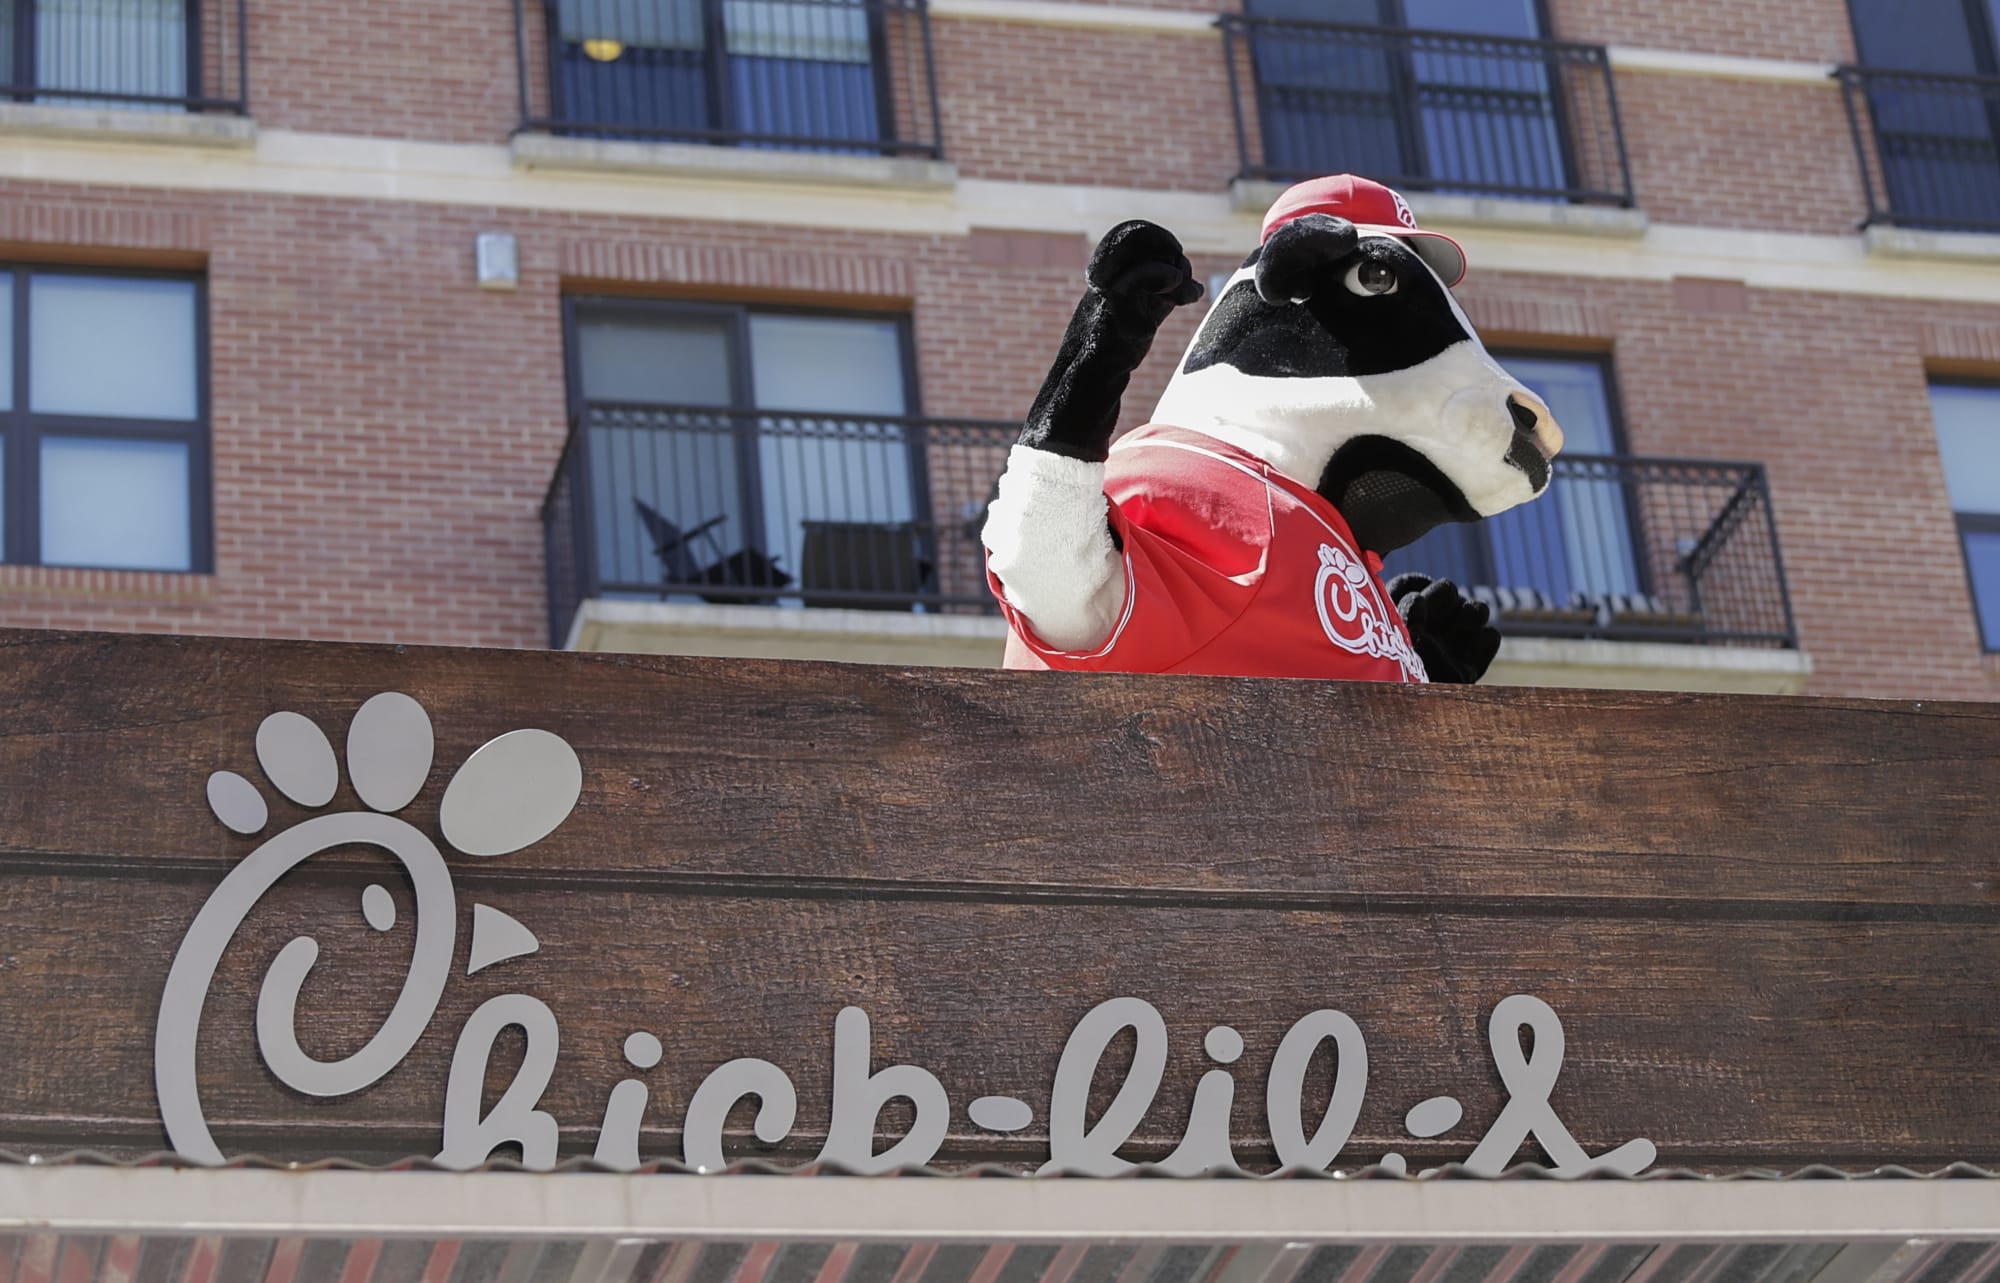 Is Chickfila open on Memorial Day?